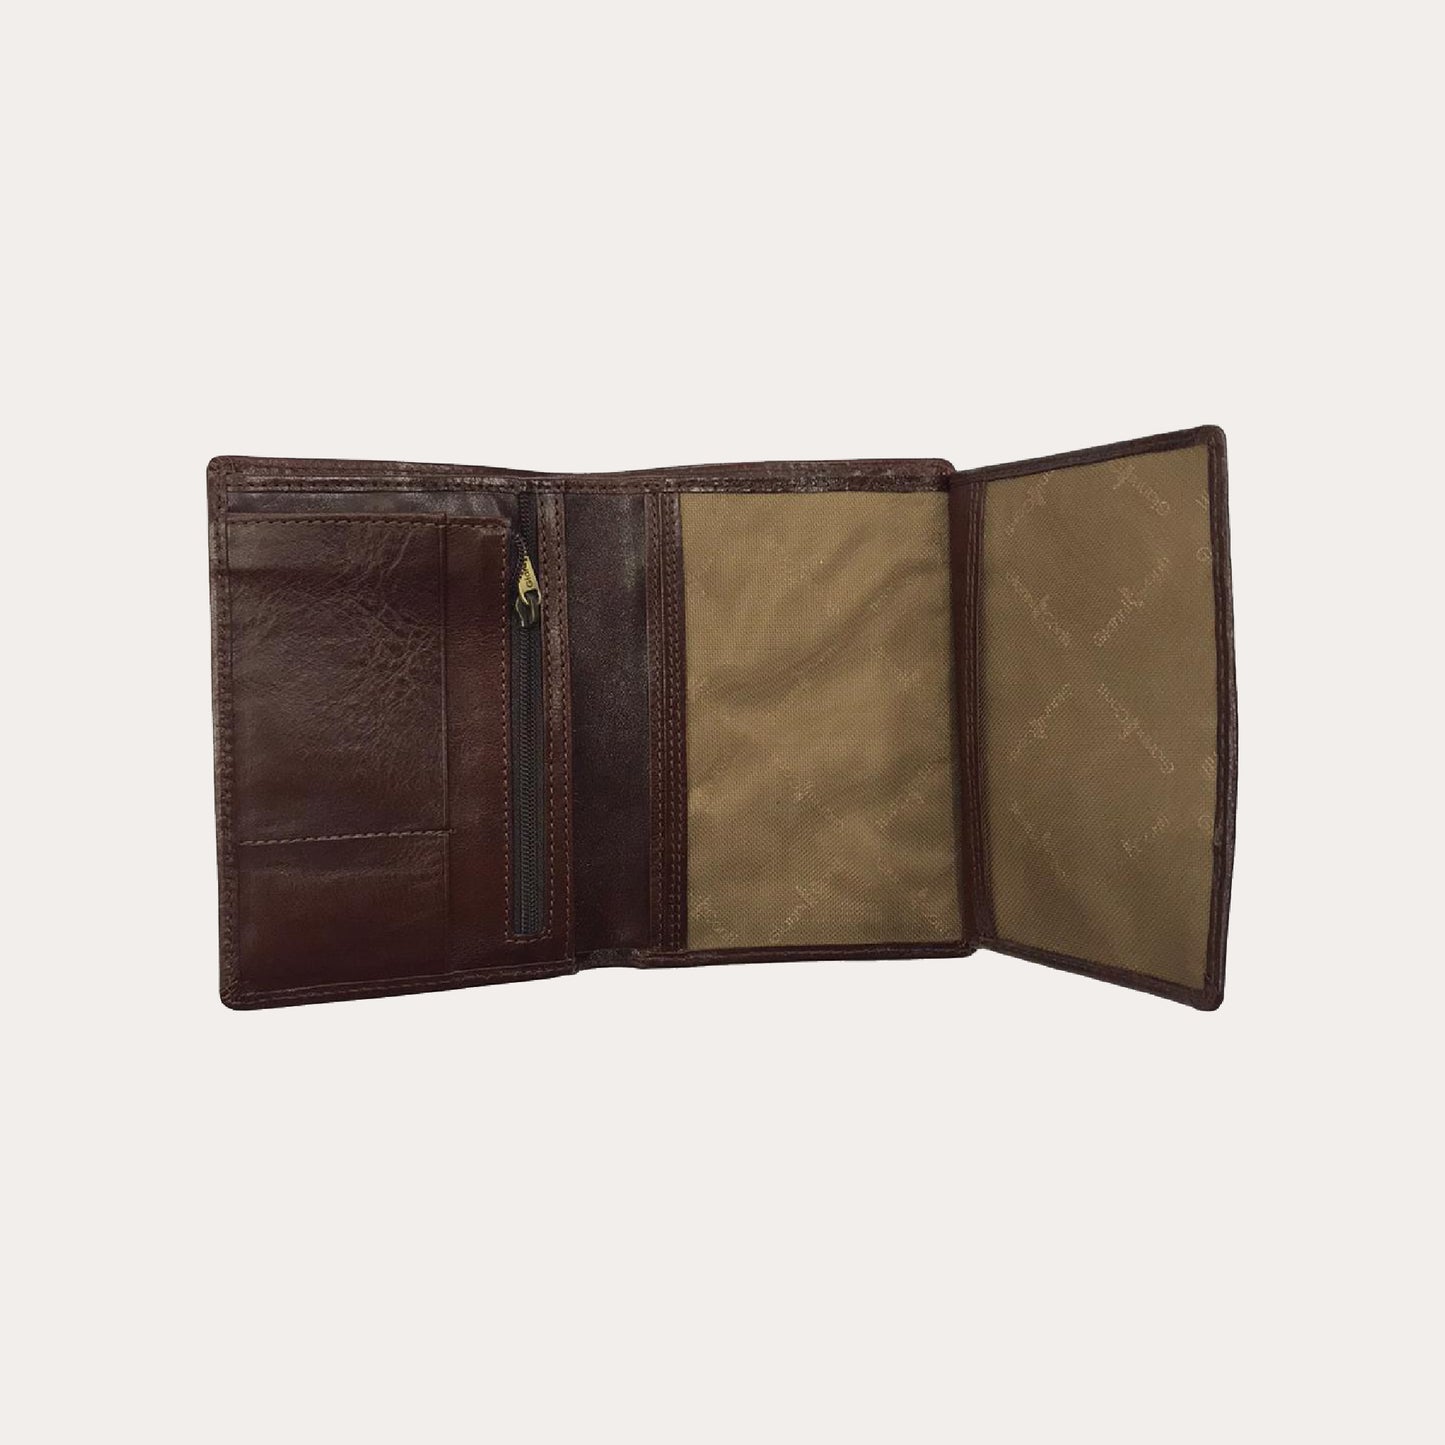 Gianni Conti Brown Leather Wallet-6 Credit Card Sections